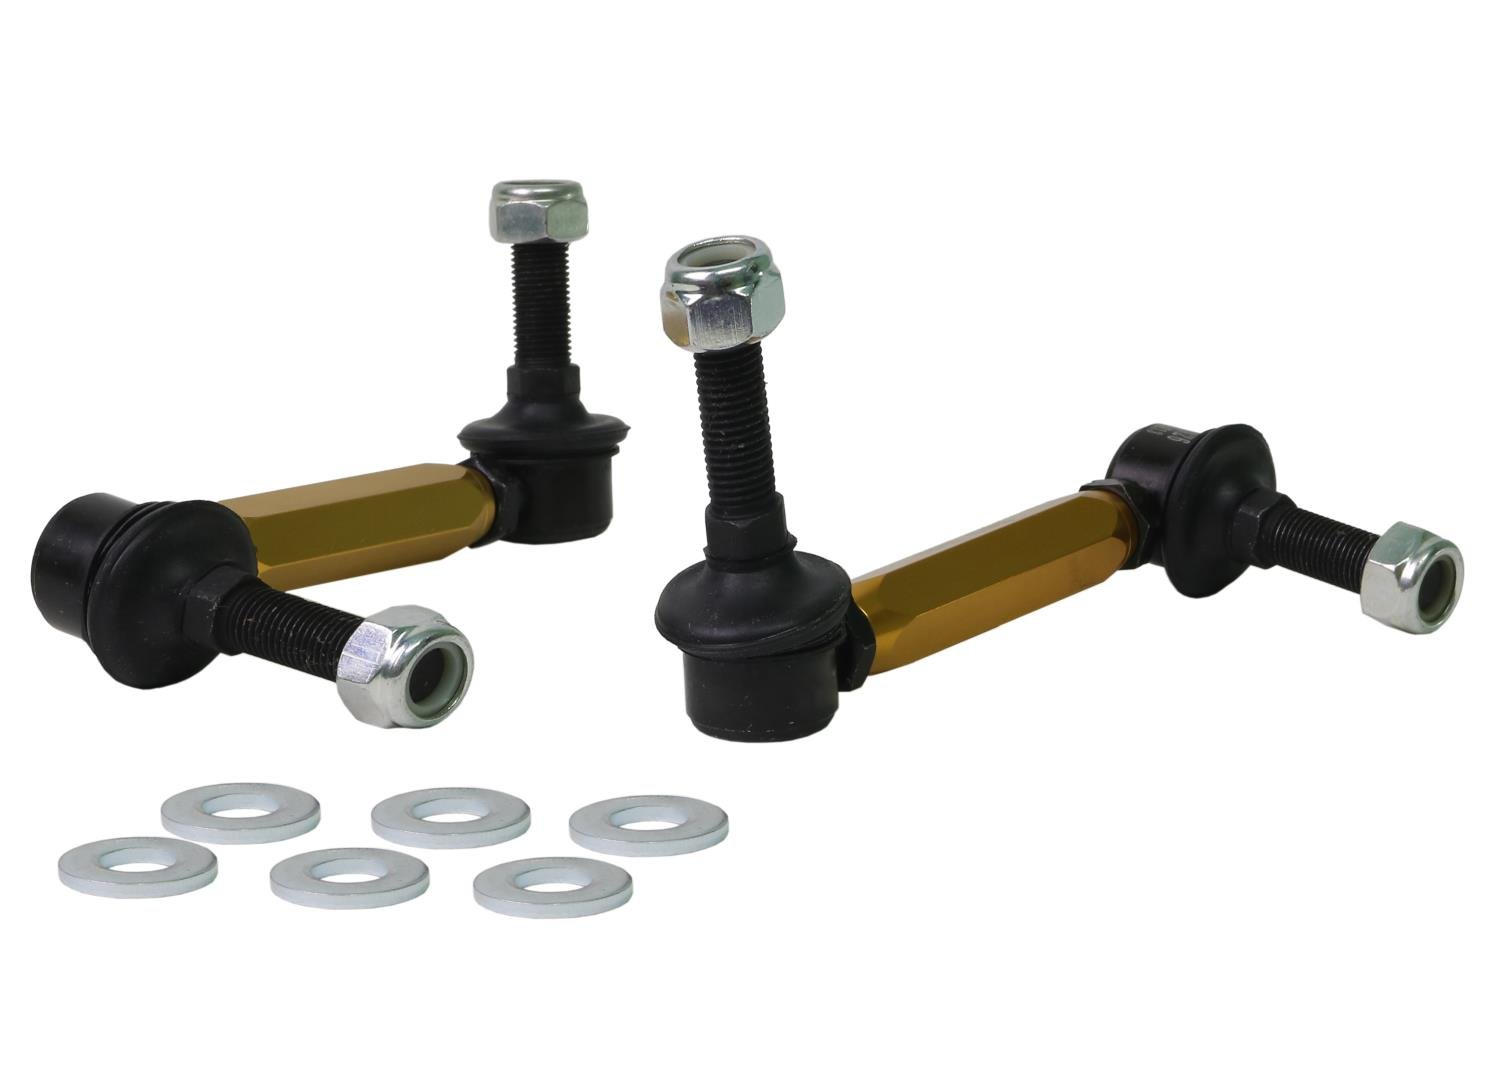 KLC220 Front Adjustable Heavy Duty Sway Bar Link Kit  Fits Select 2003-2021 Toyota Models